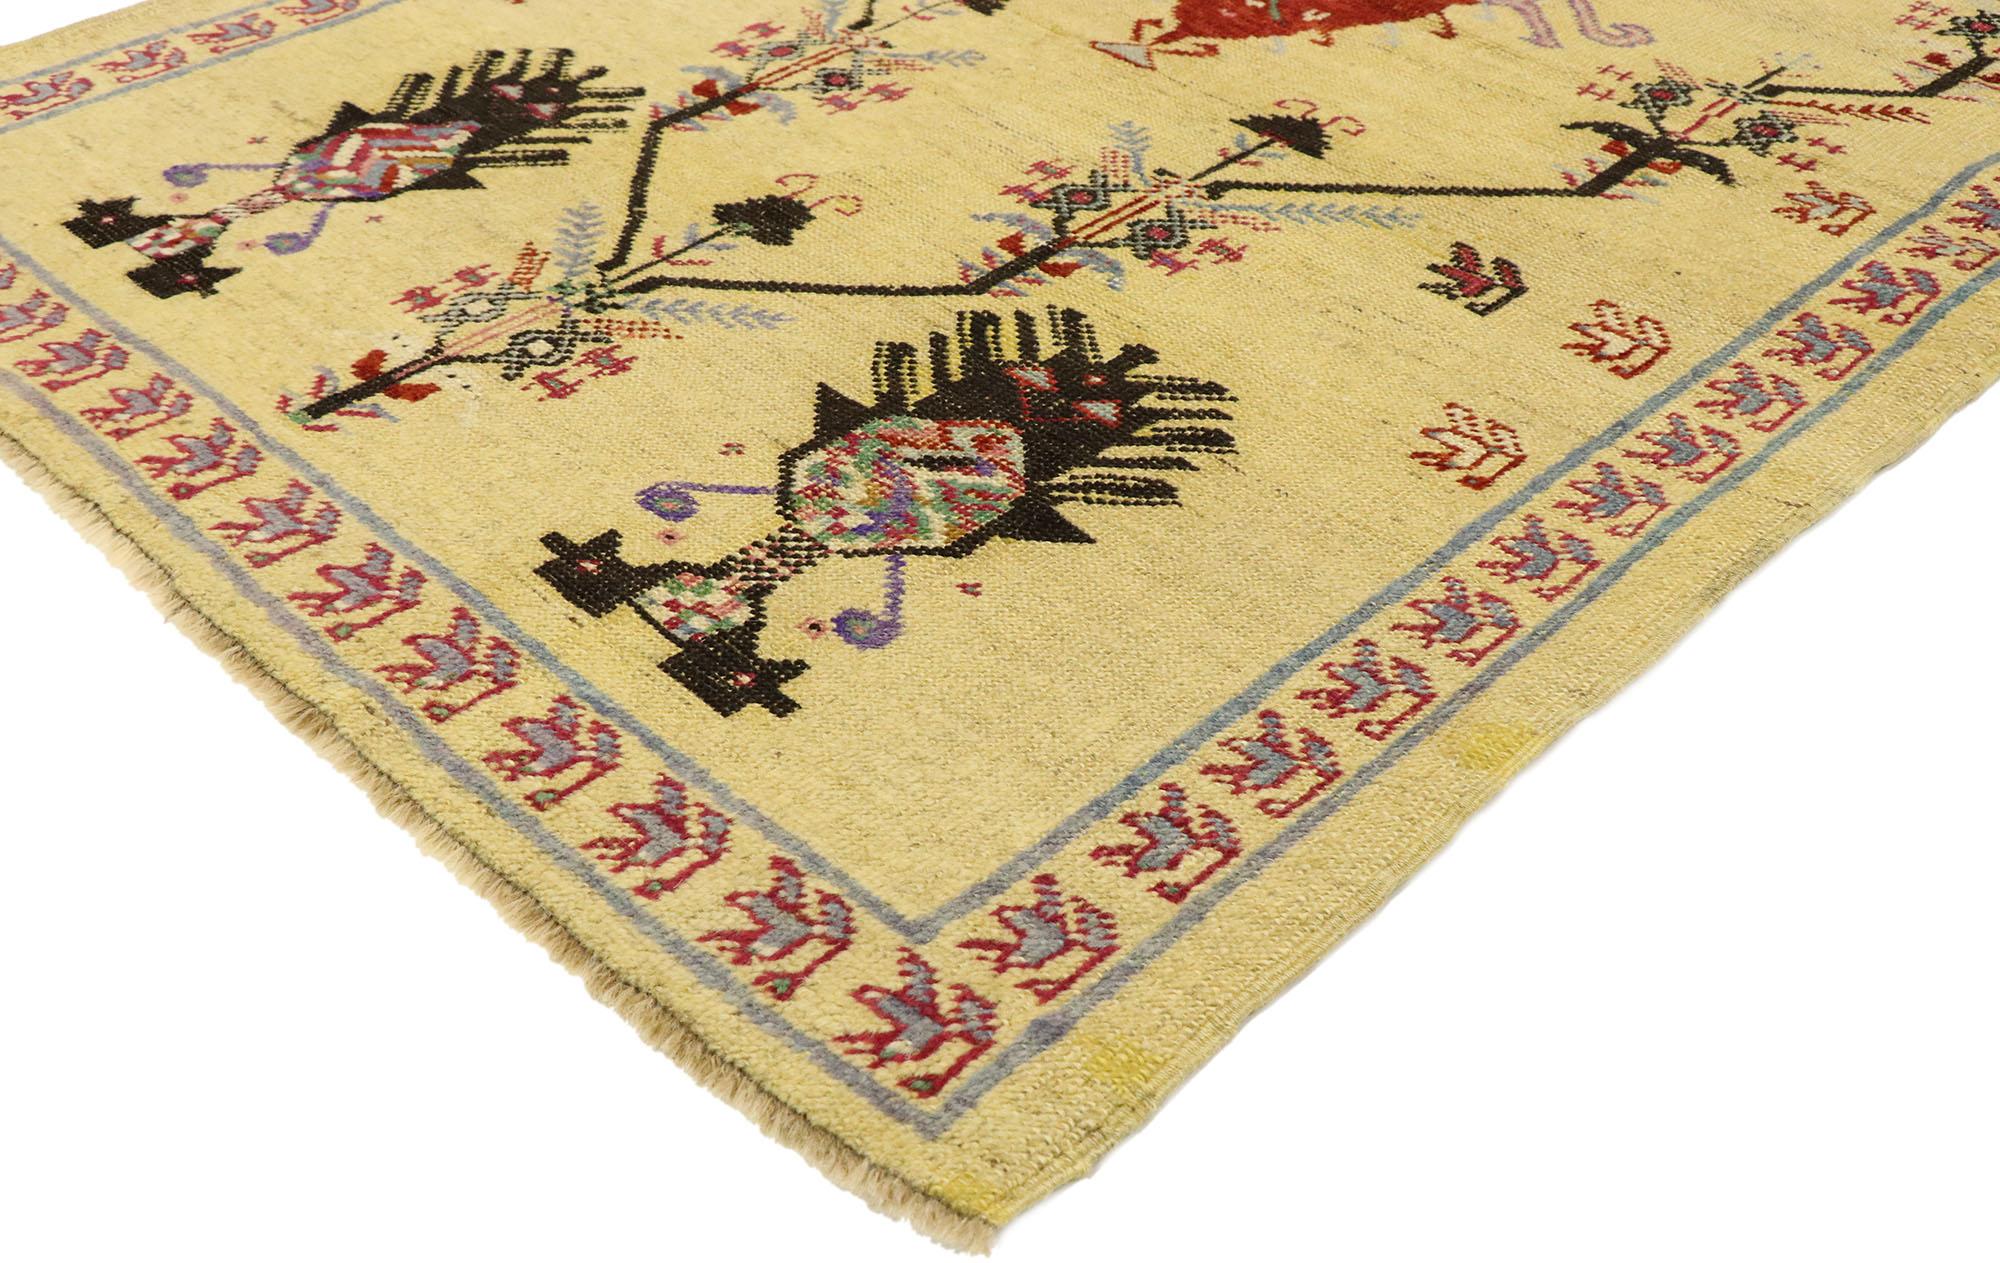 50633 Vintage Turkish Oushak rug with Warm Tuscan style 03'03 x 05'02. Emanating timeless elegance and warm, earthy colors, this hand knotted wool vintage Turkish Oushak rug beautifully embodies warm Tuscan Italian style with Mediterranean vibes. A